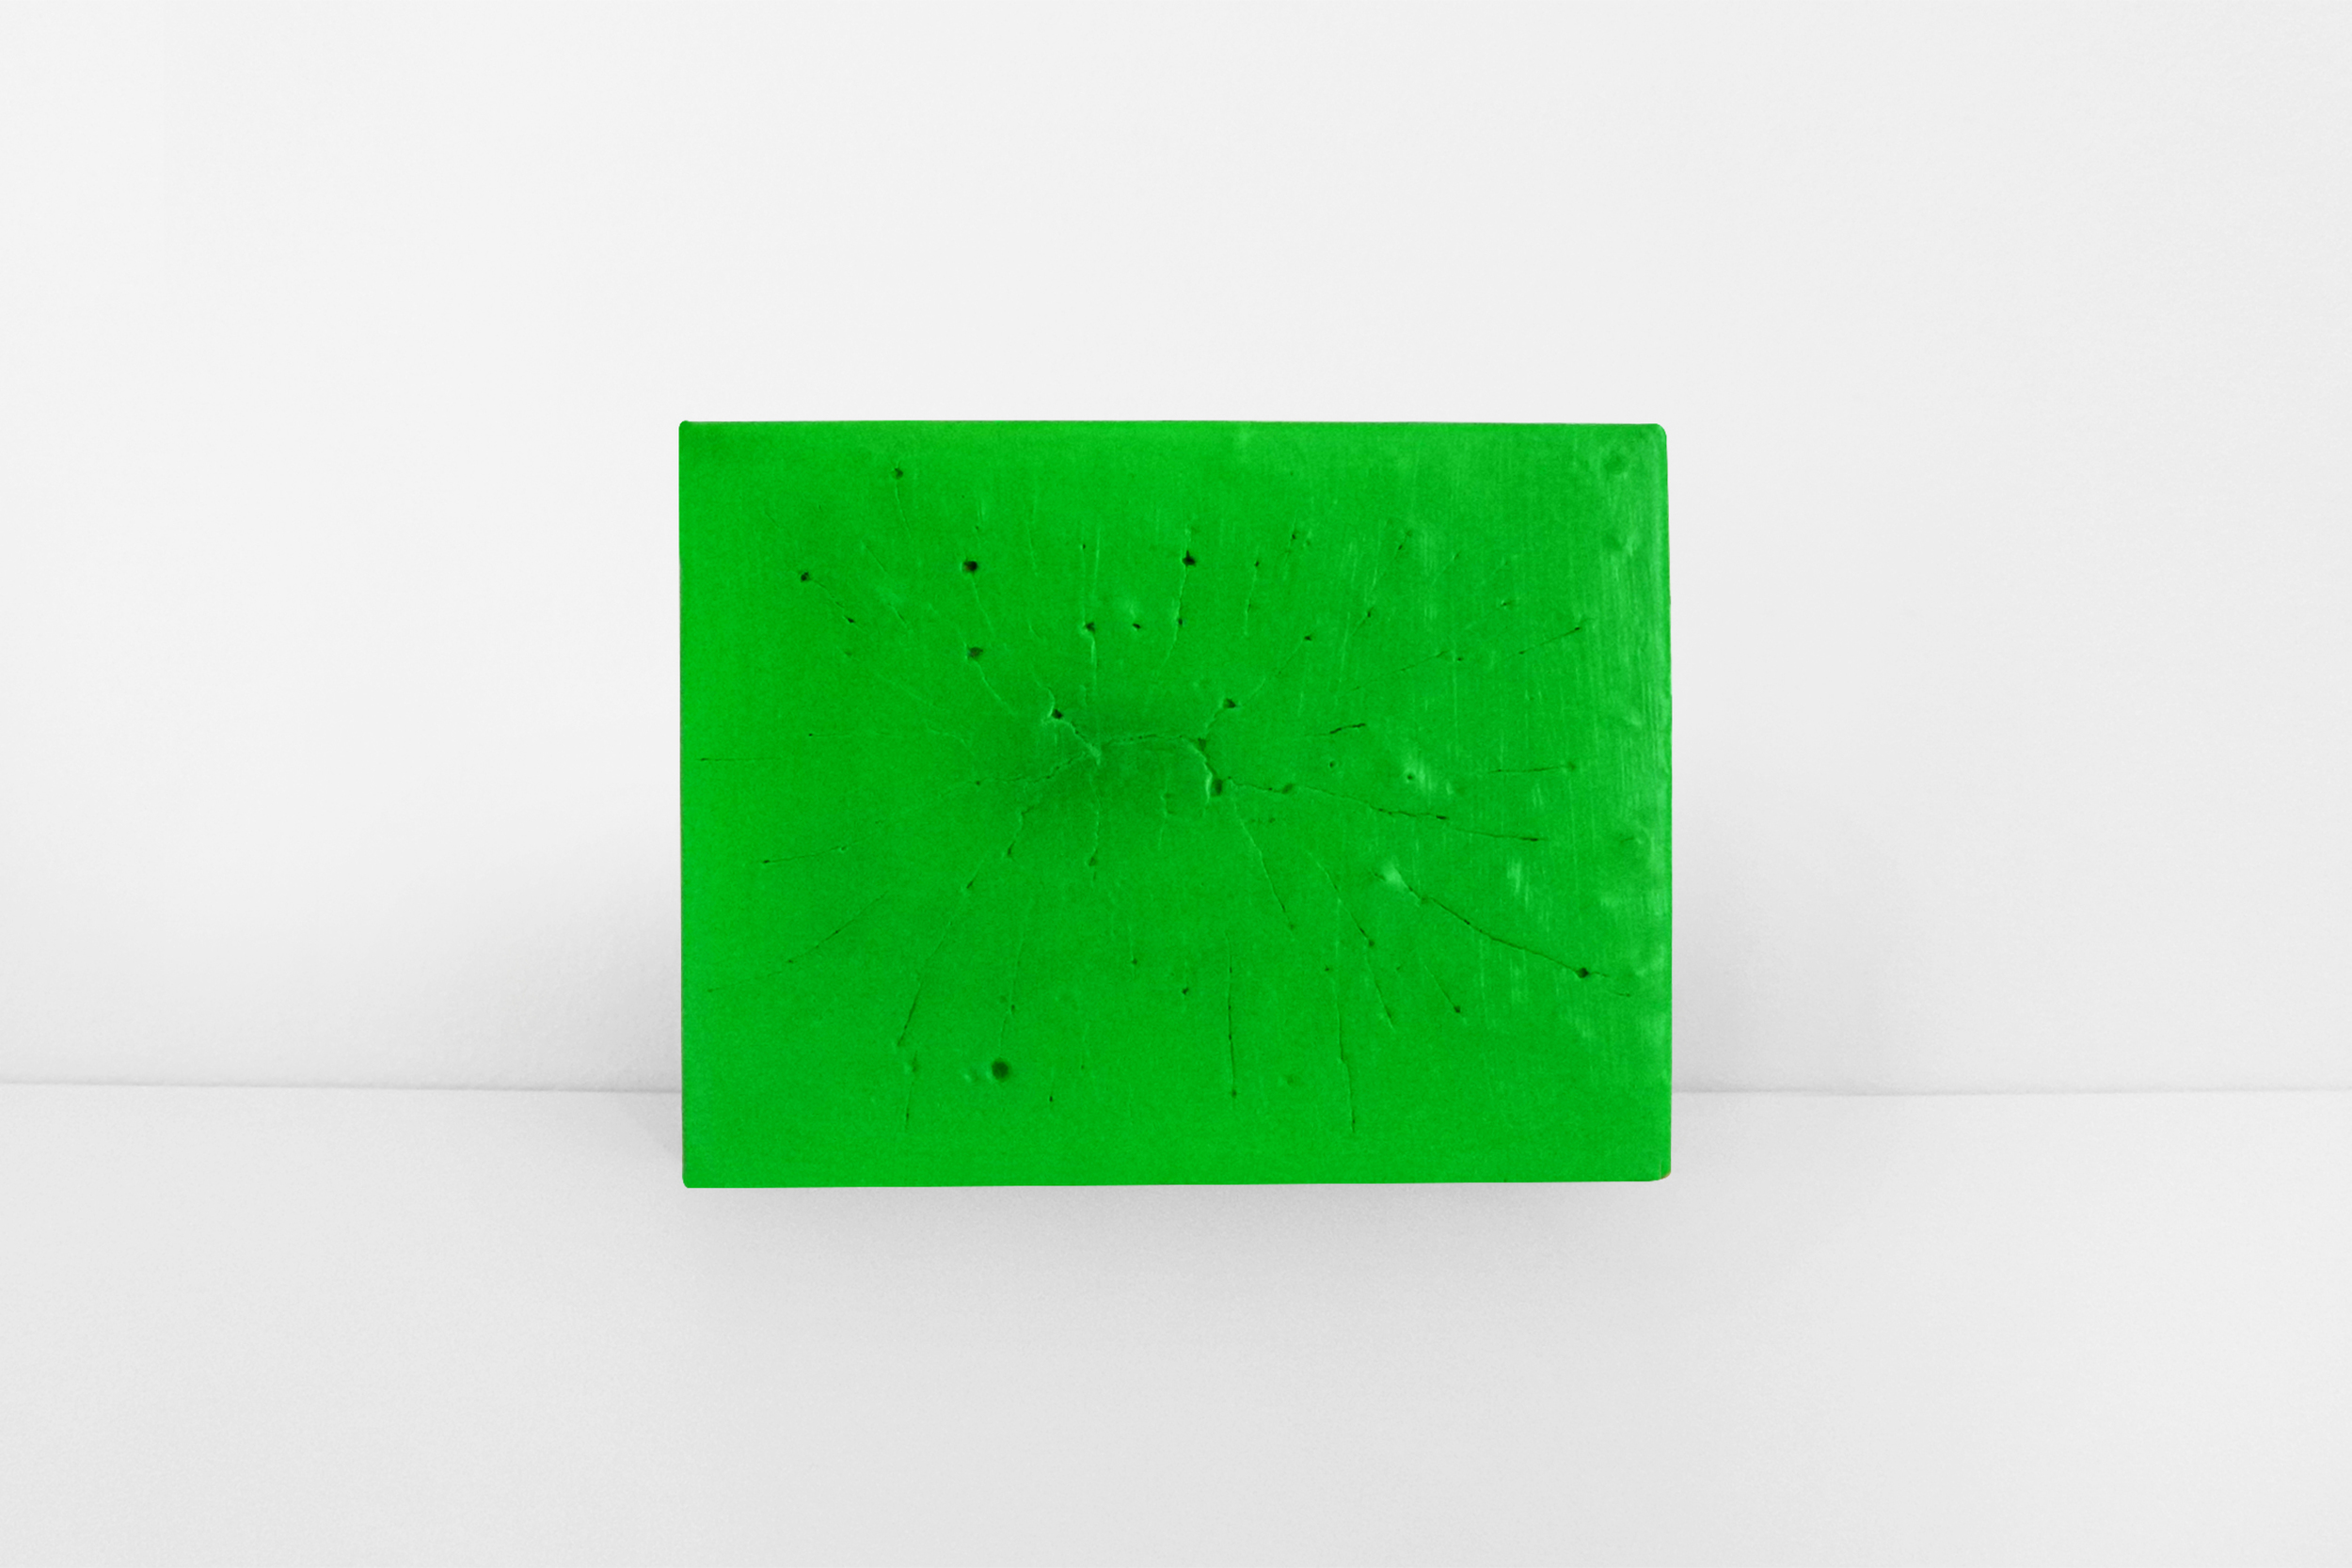  Lime, 2014 mixed media on wood 7.5x10 cm / 3x4 in *EAF127    